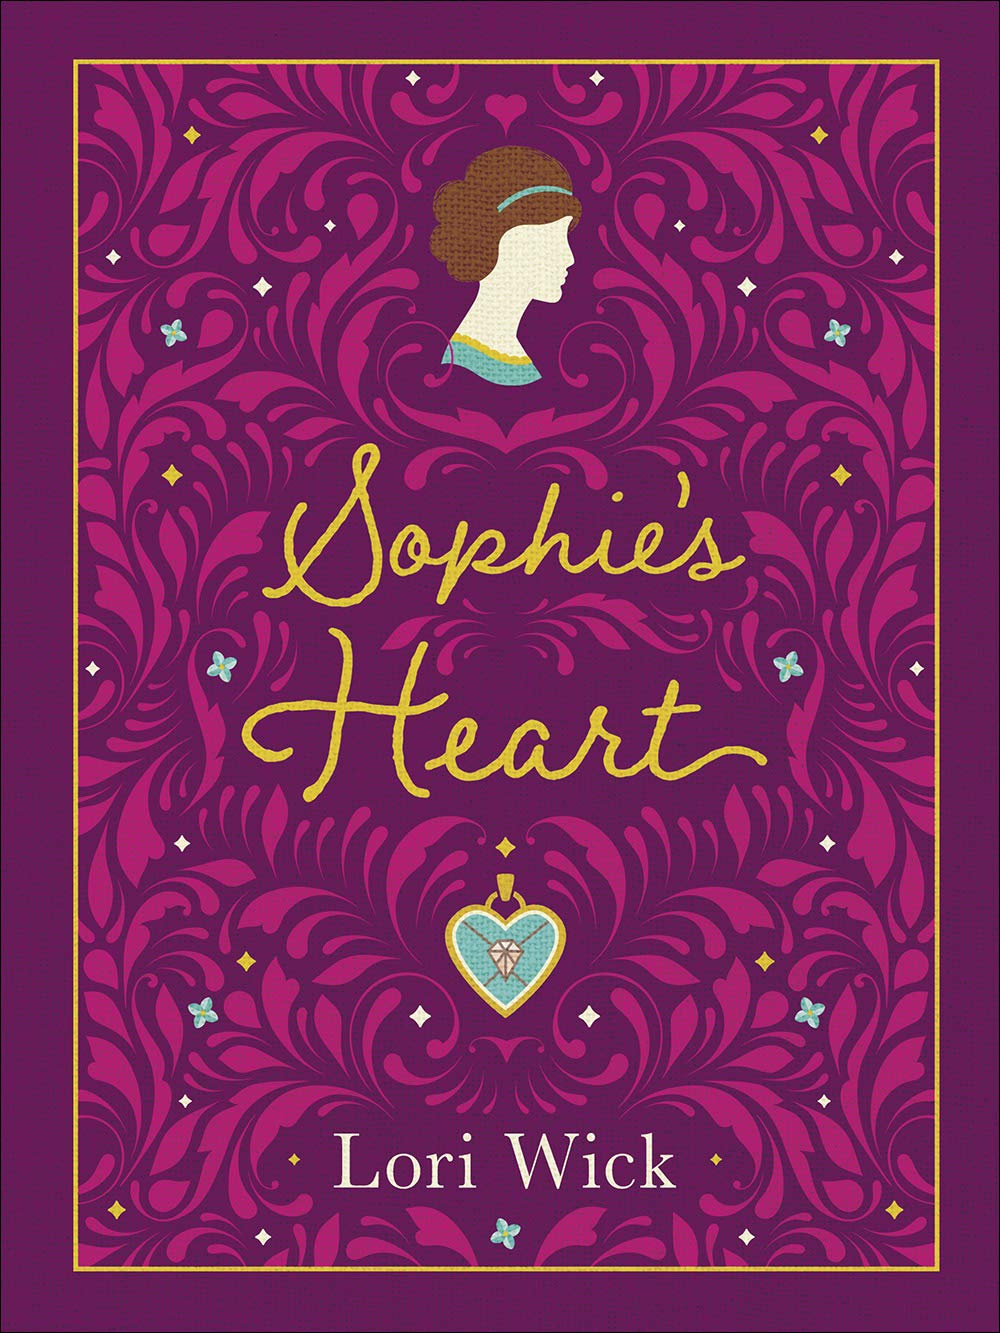 Sophie's Heart Special Edition